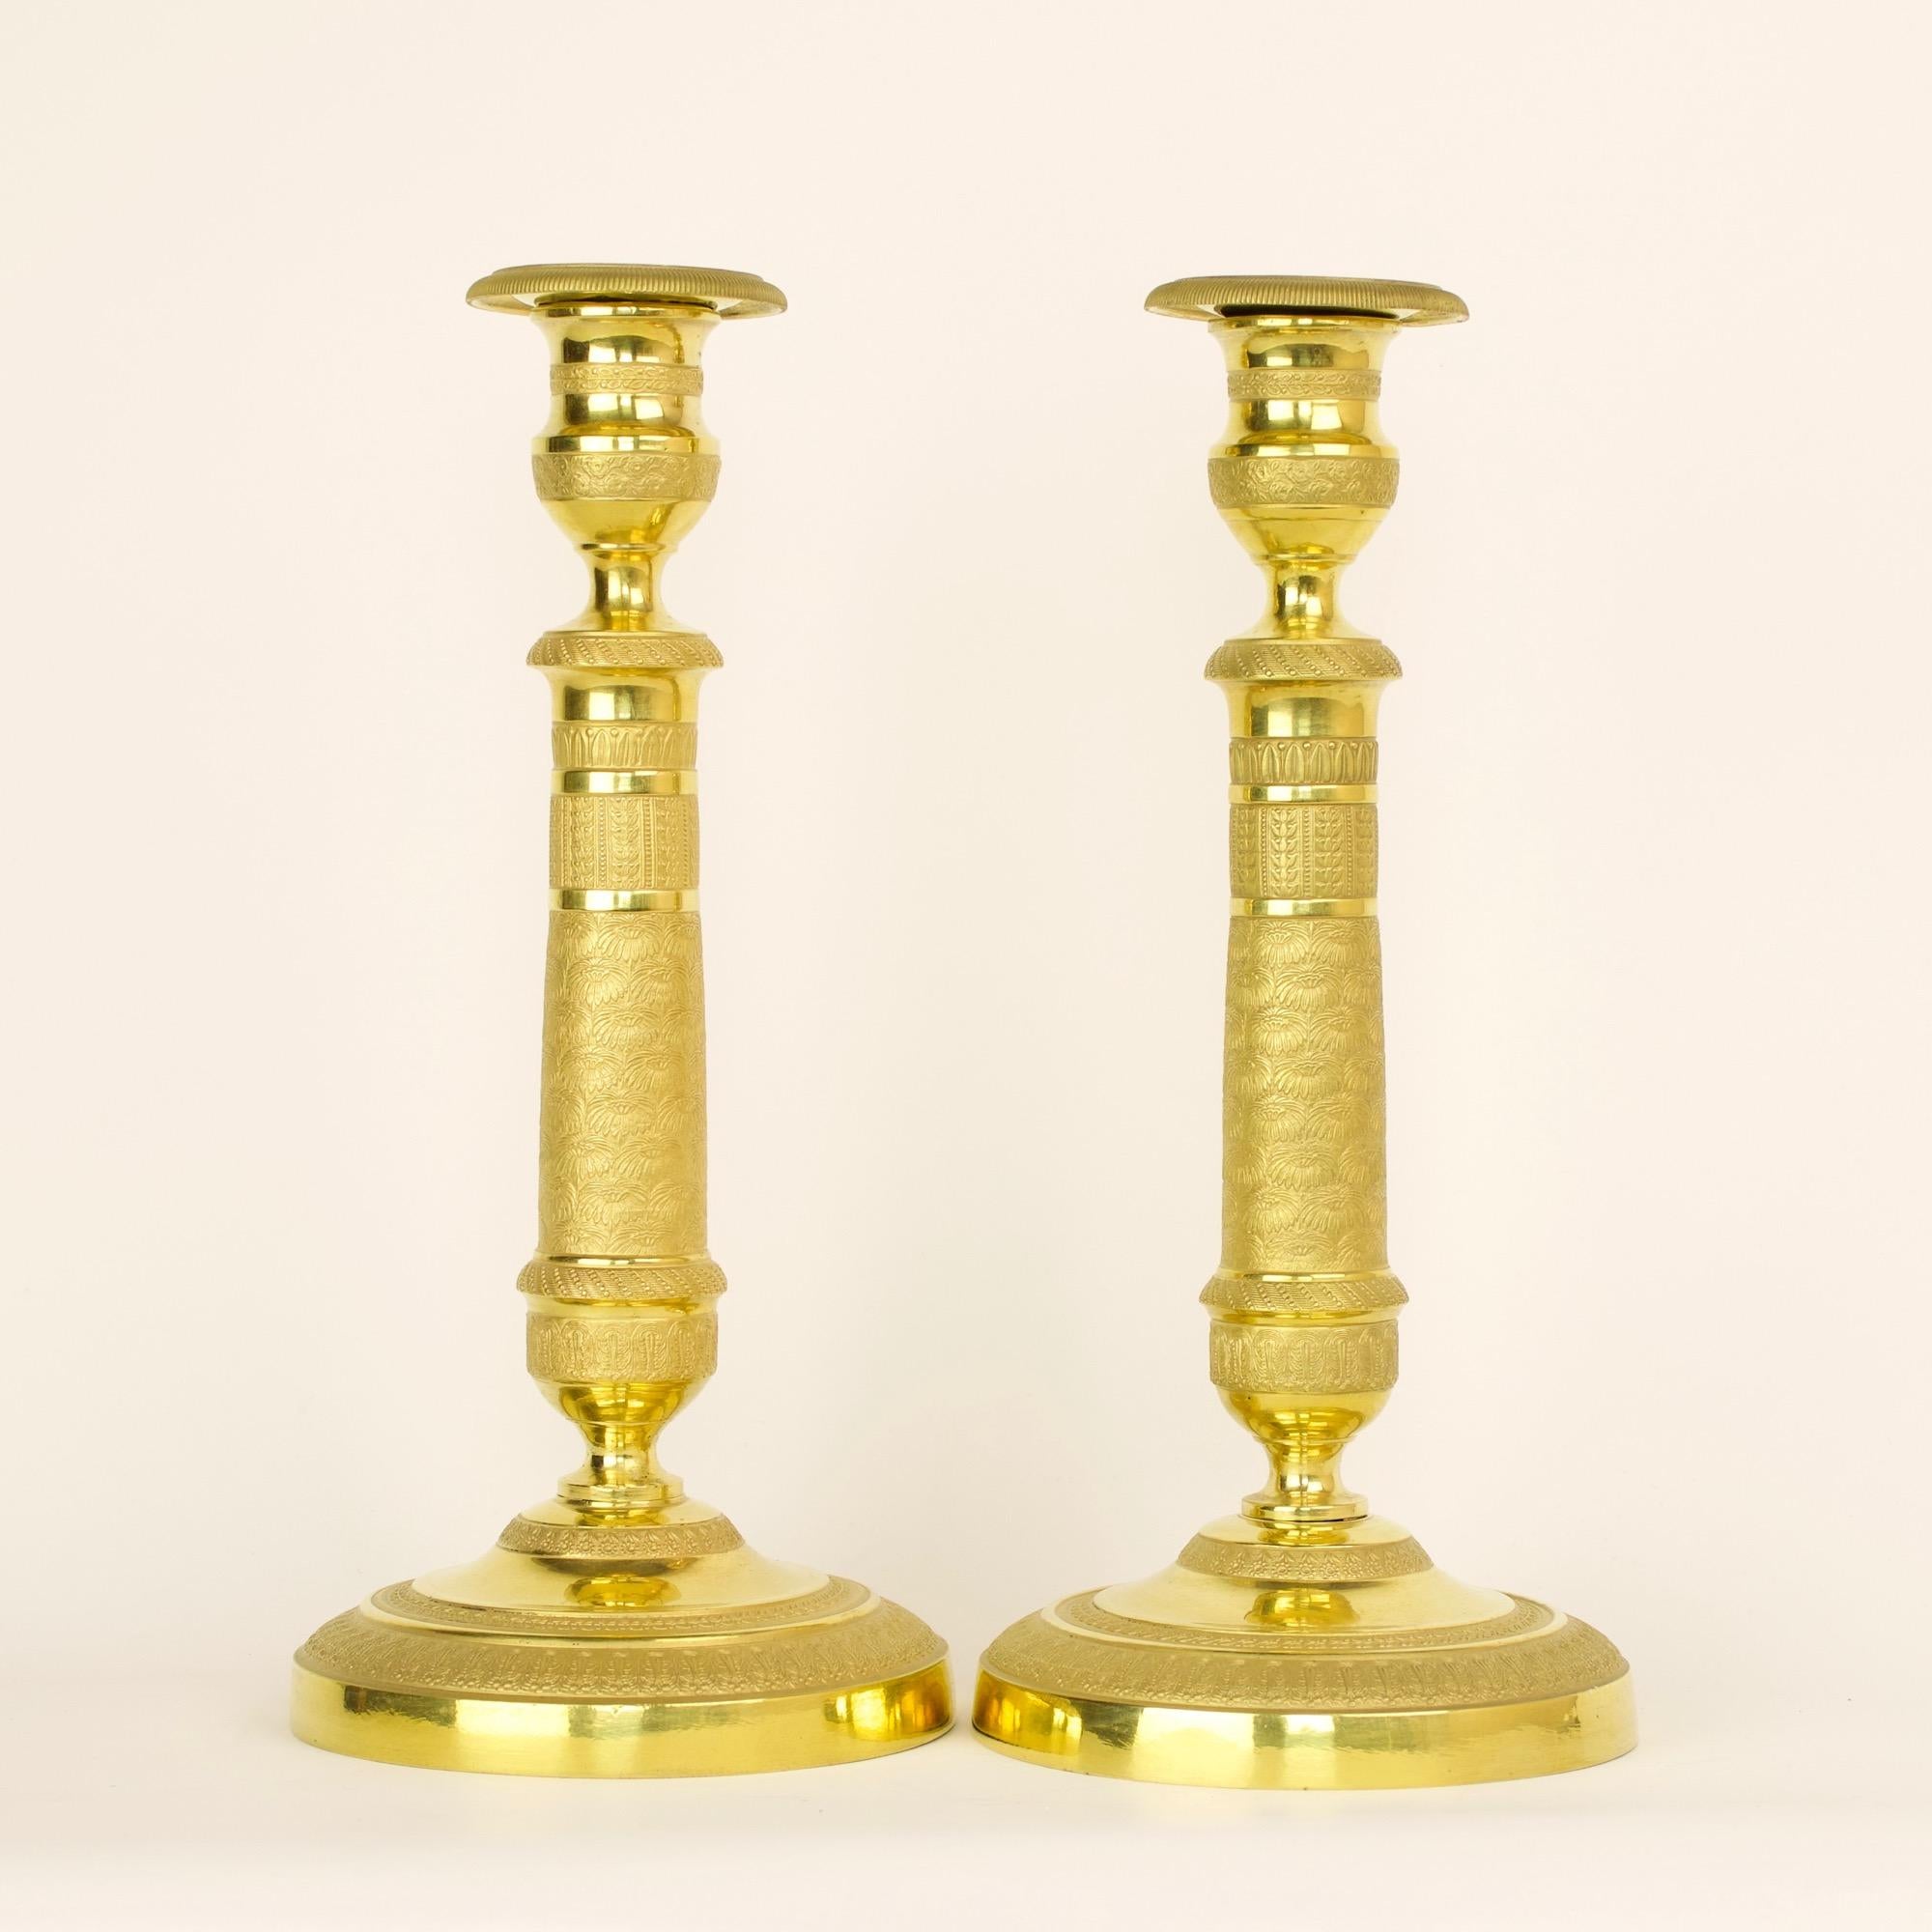 Excellent pair of early 19 century French empire gilt bronze neoclassical candlesticks.

A tapering stem with rich and finely chased relief decoration depicting stylised flowers and foliage friezes as well as an unusual marguerite or daisy onament